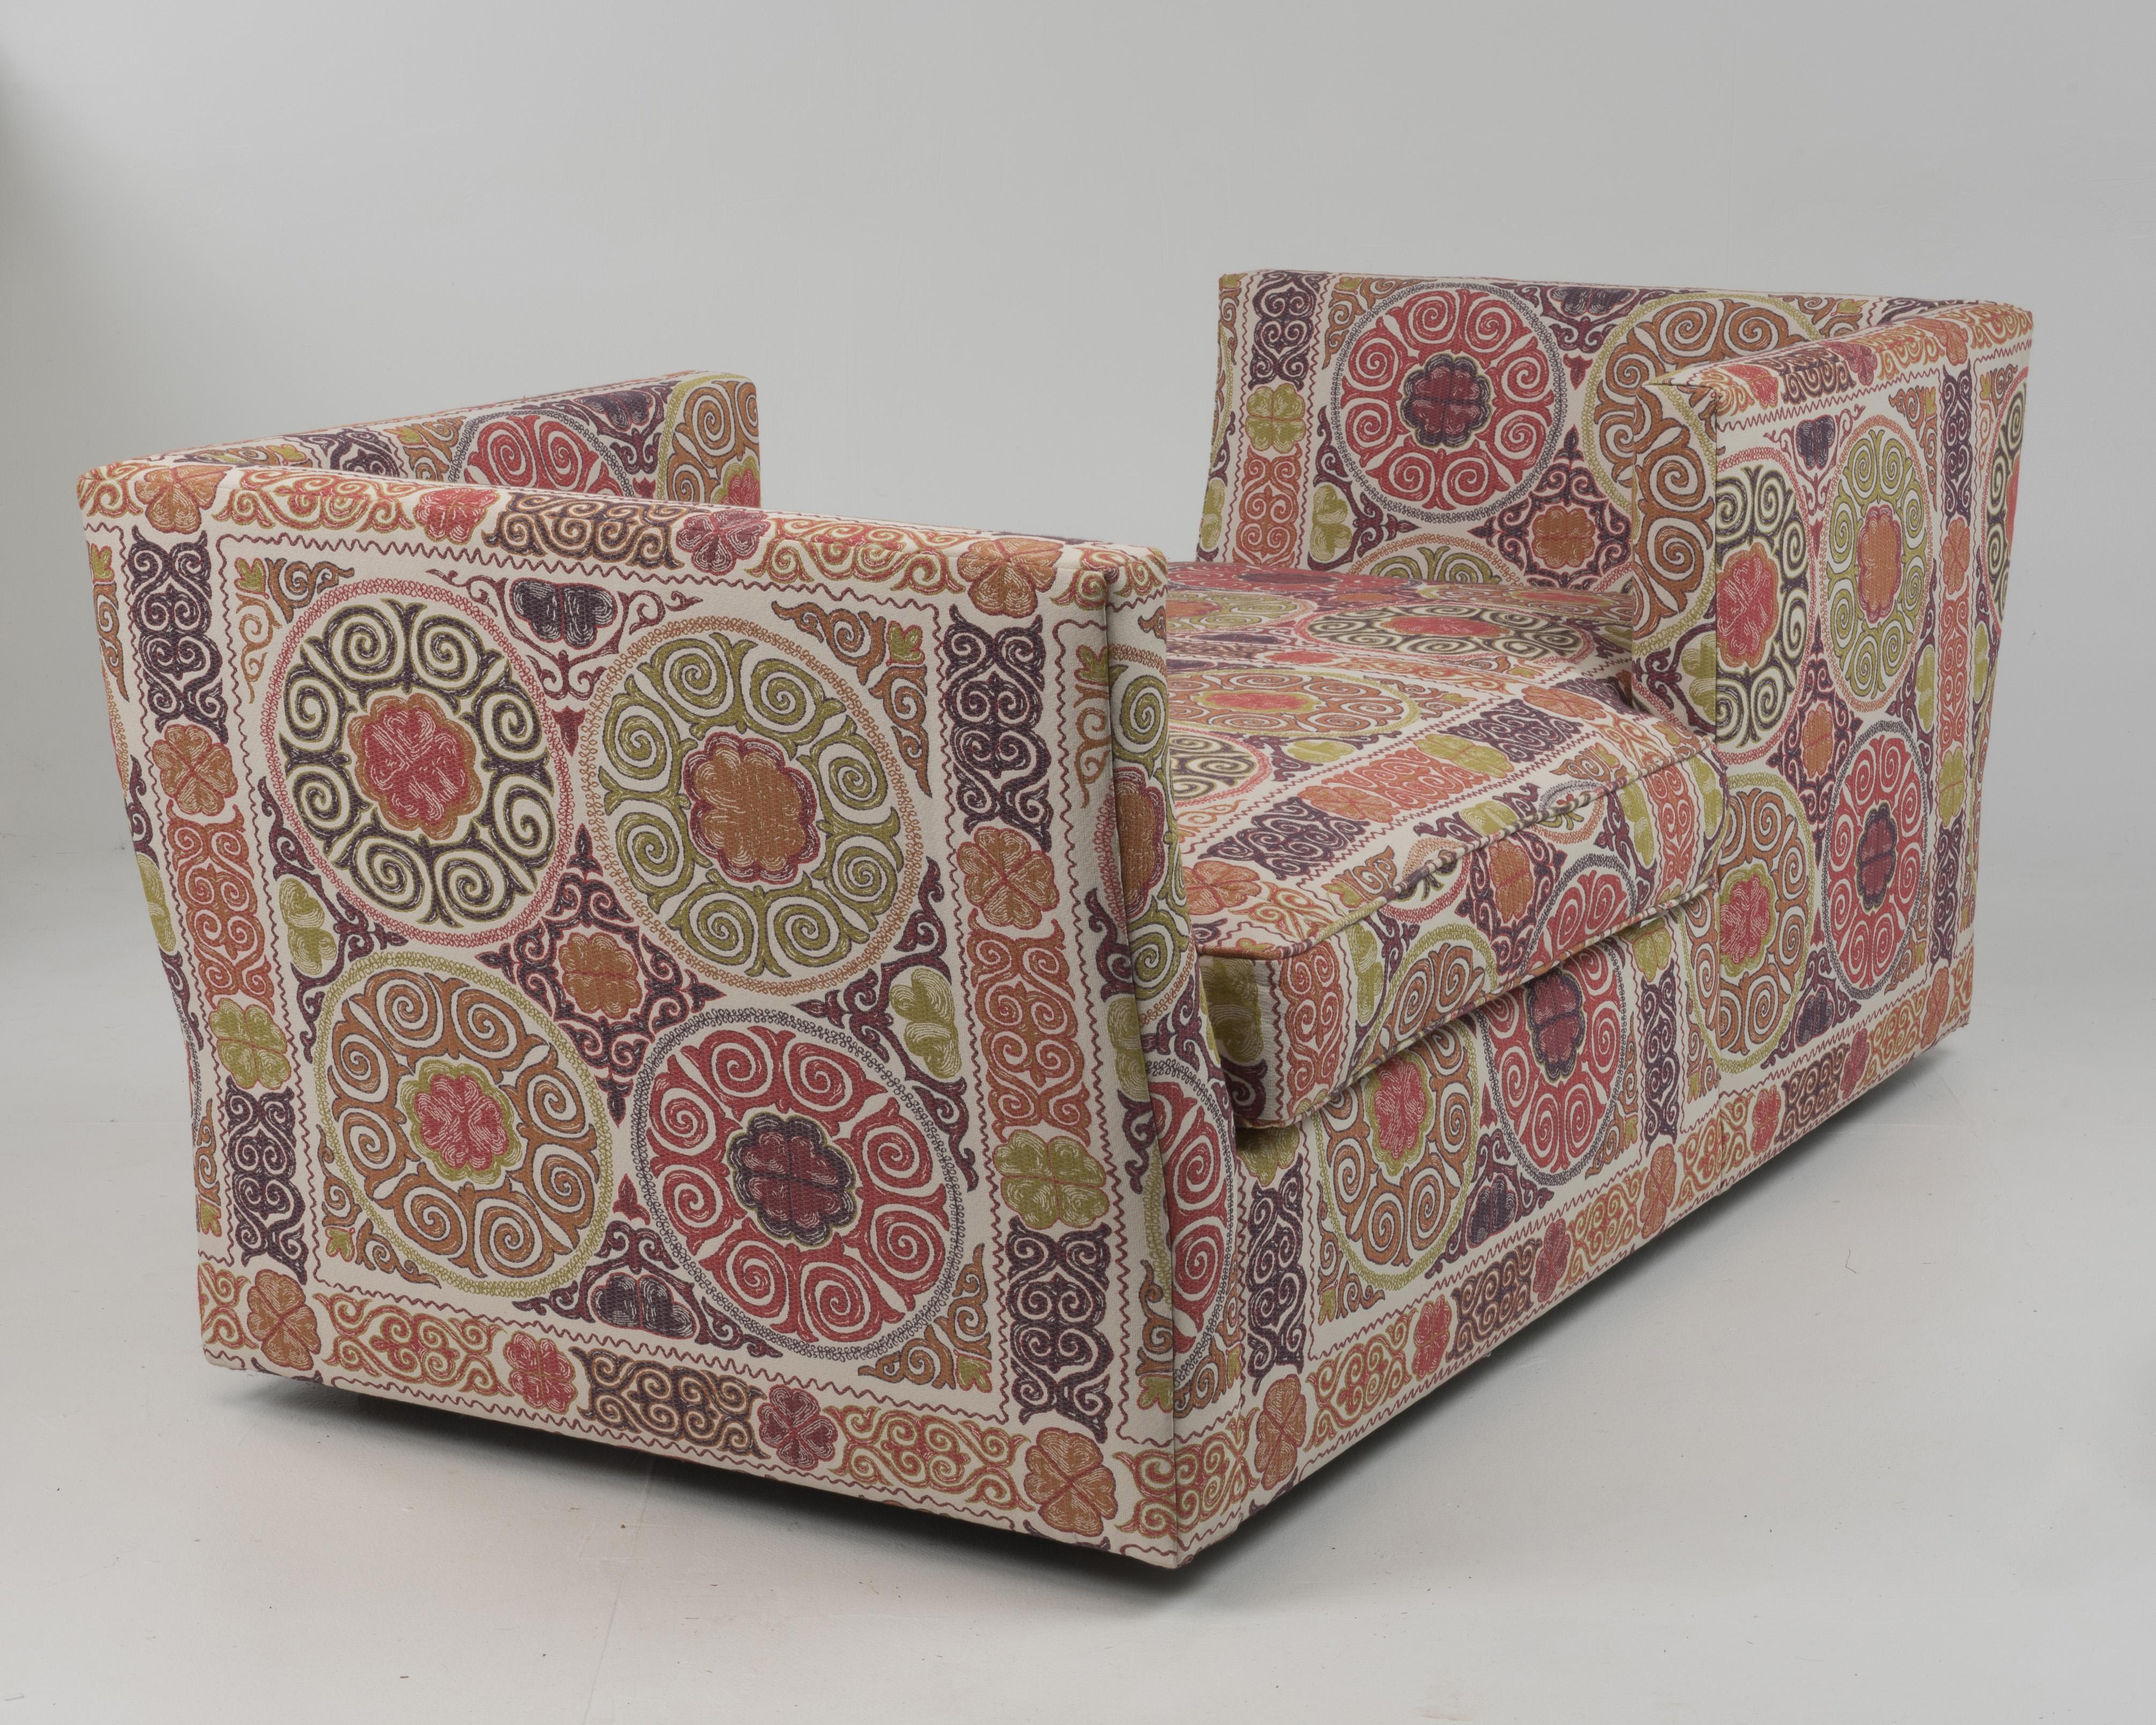 A show stopper focal point of a sofa, one of a kind, custom Tête-á-Tête in embroidered Suzani-style fabric. Would be fabulous floating in a large room, as it's incredible from every angle.
The side opening is 39”.
Arm height 36
Seat interior